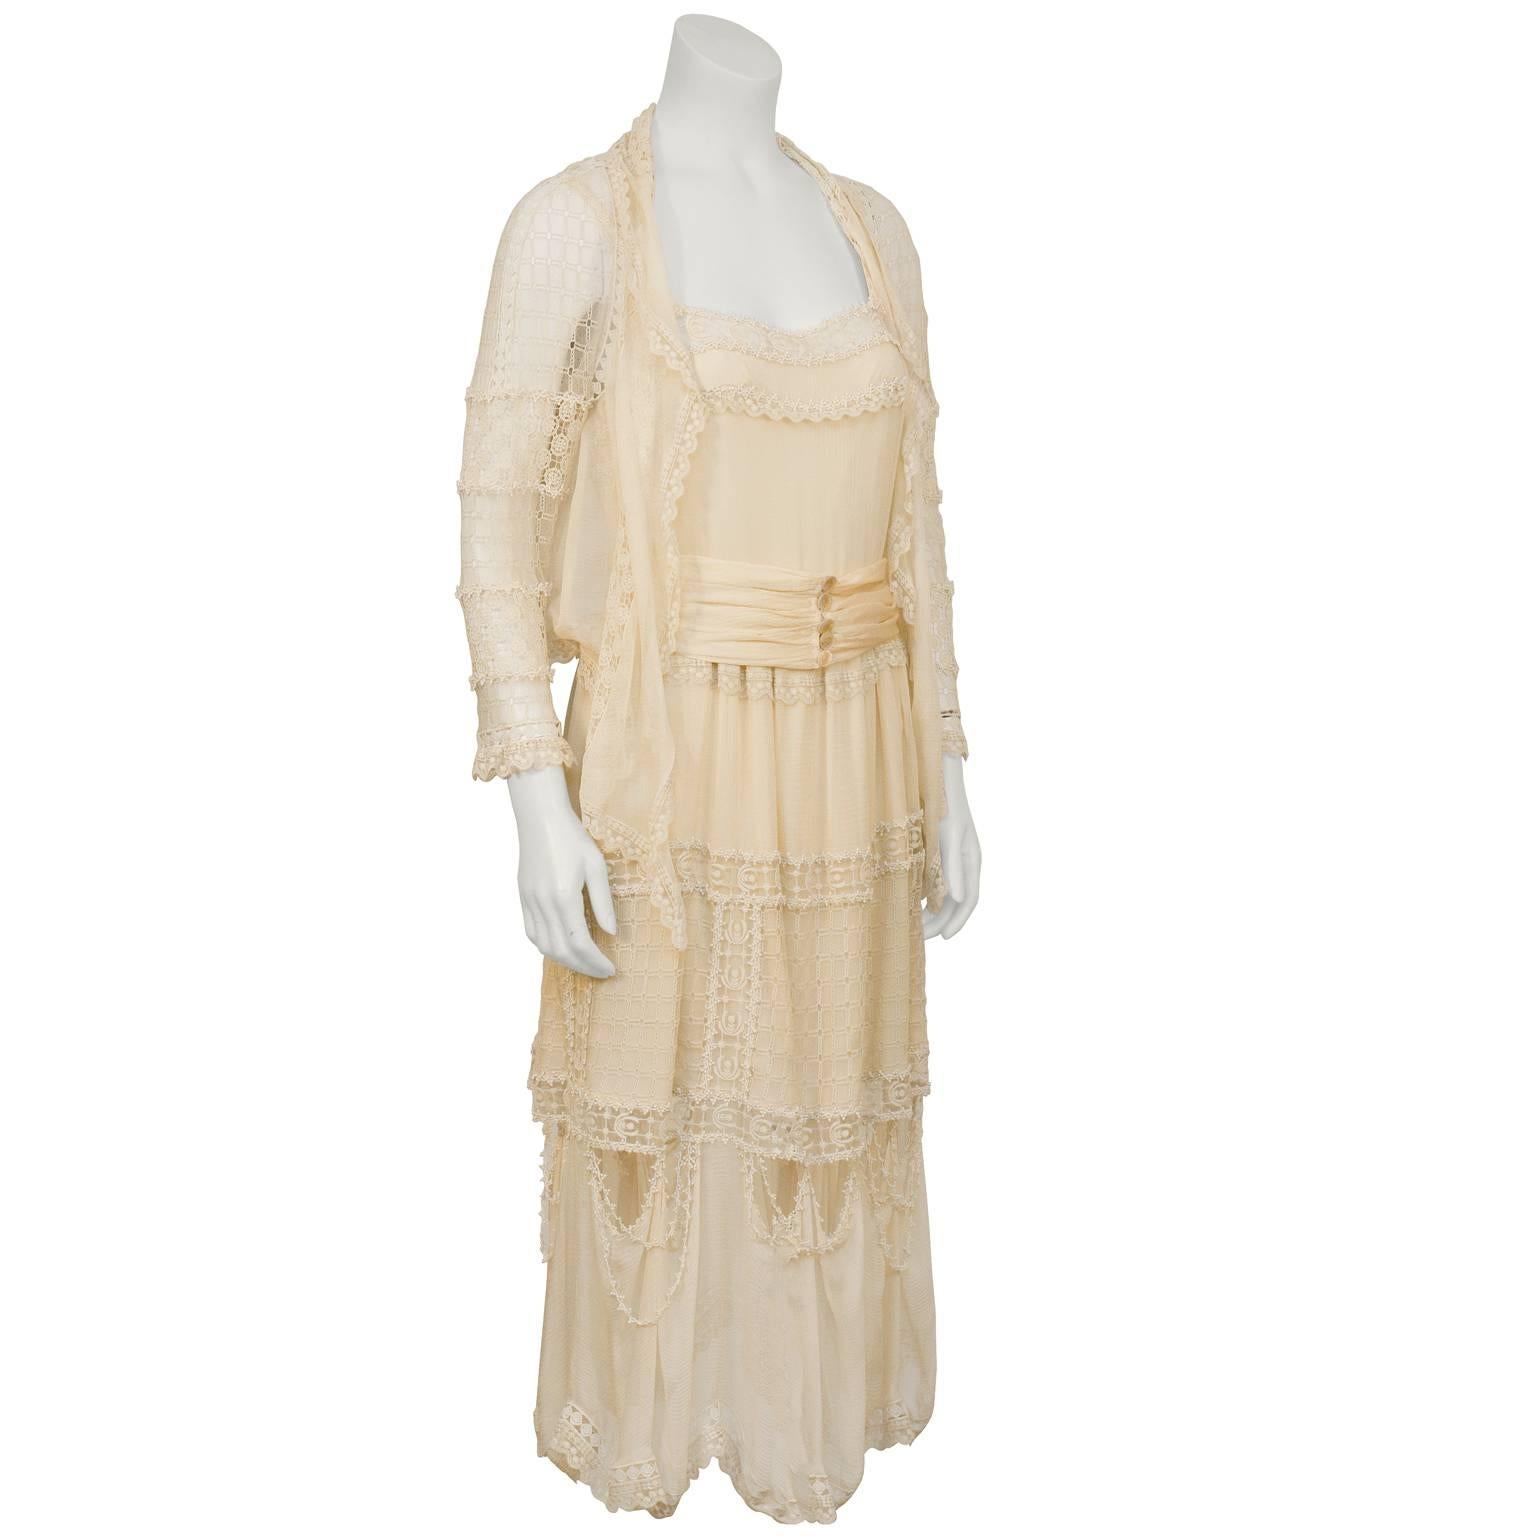 Ultra feminine blush lace dress and jacket by Chloe from the 1970's. The dress is detailed with a variety of laces  and crochet trims along the straps, bust, waist and skirt. The delicate jacket has lace/crochet sleeves, lace panels along the front